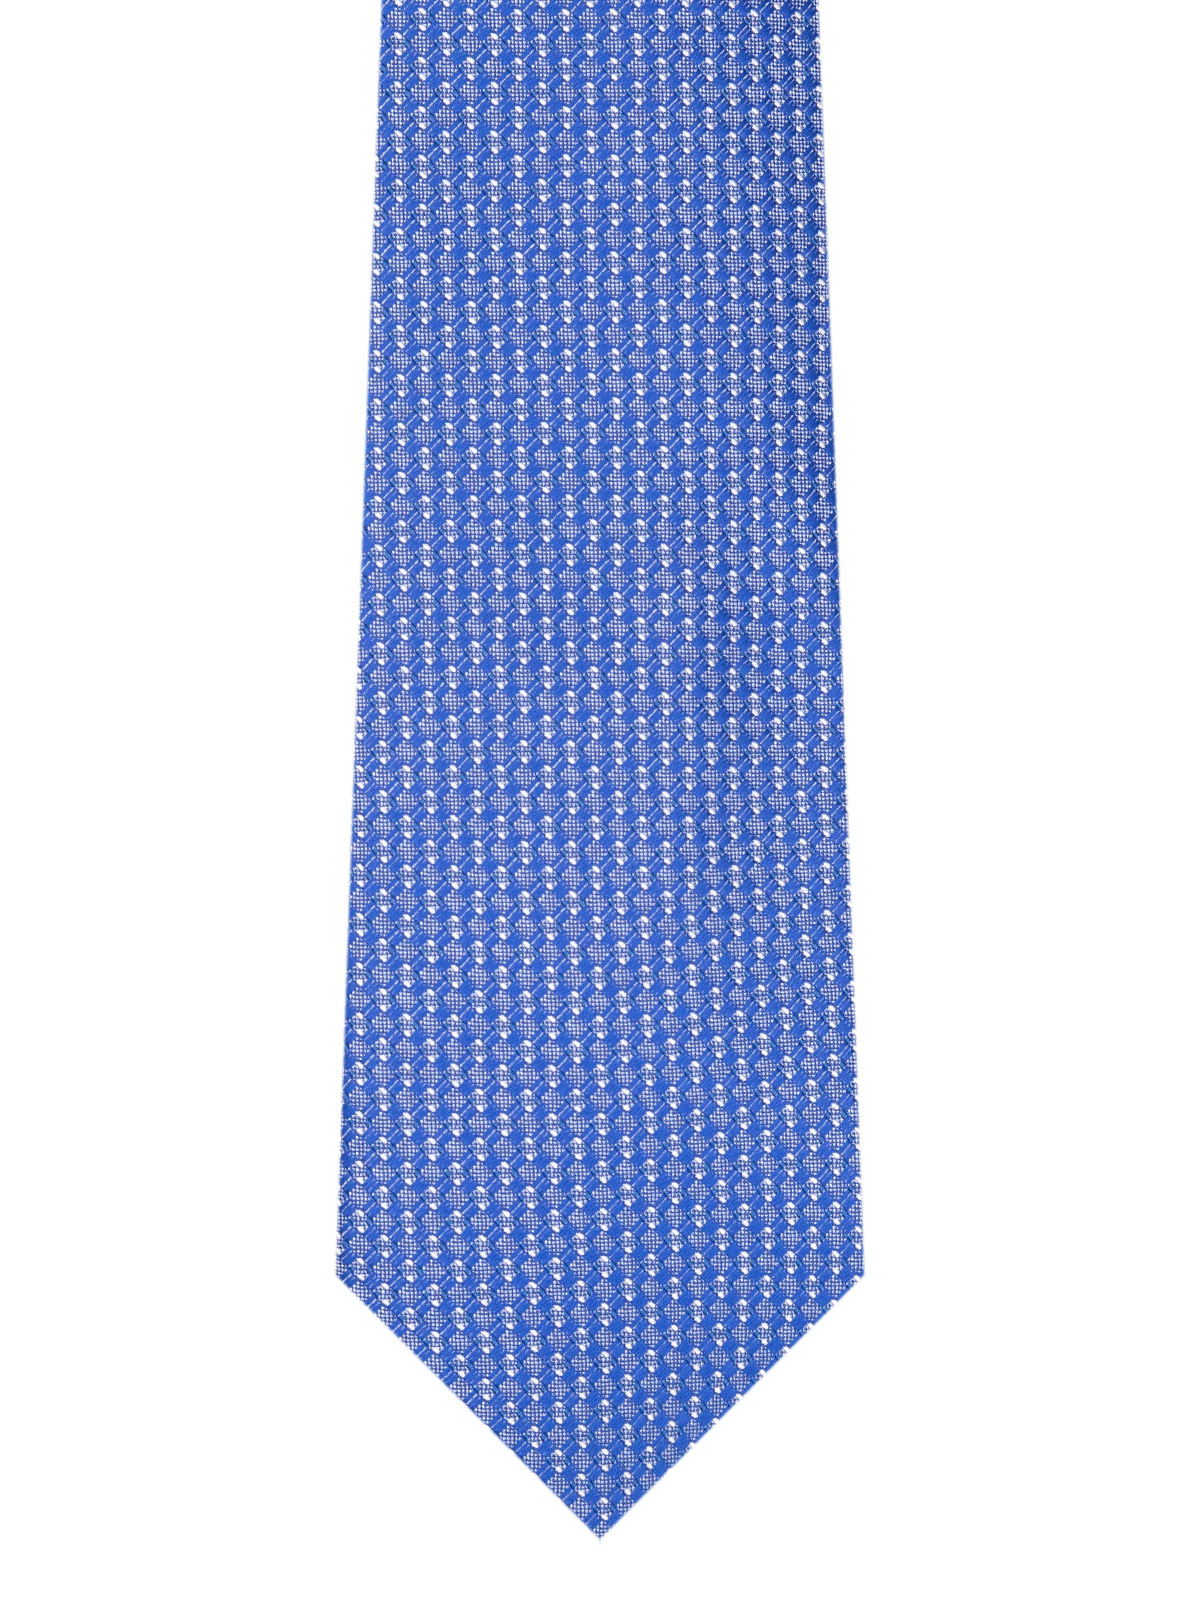 Structured tie in light blue - 10203 - € 14.06 img2